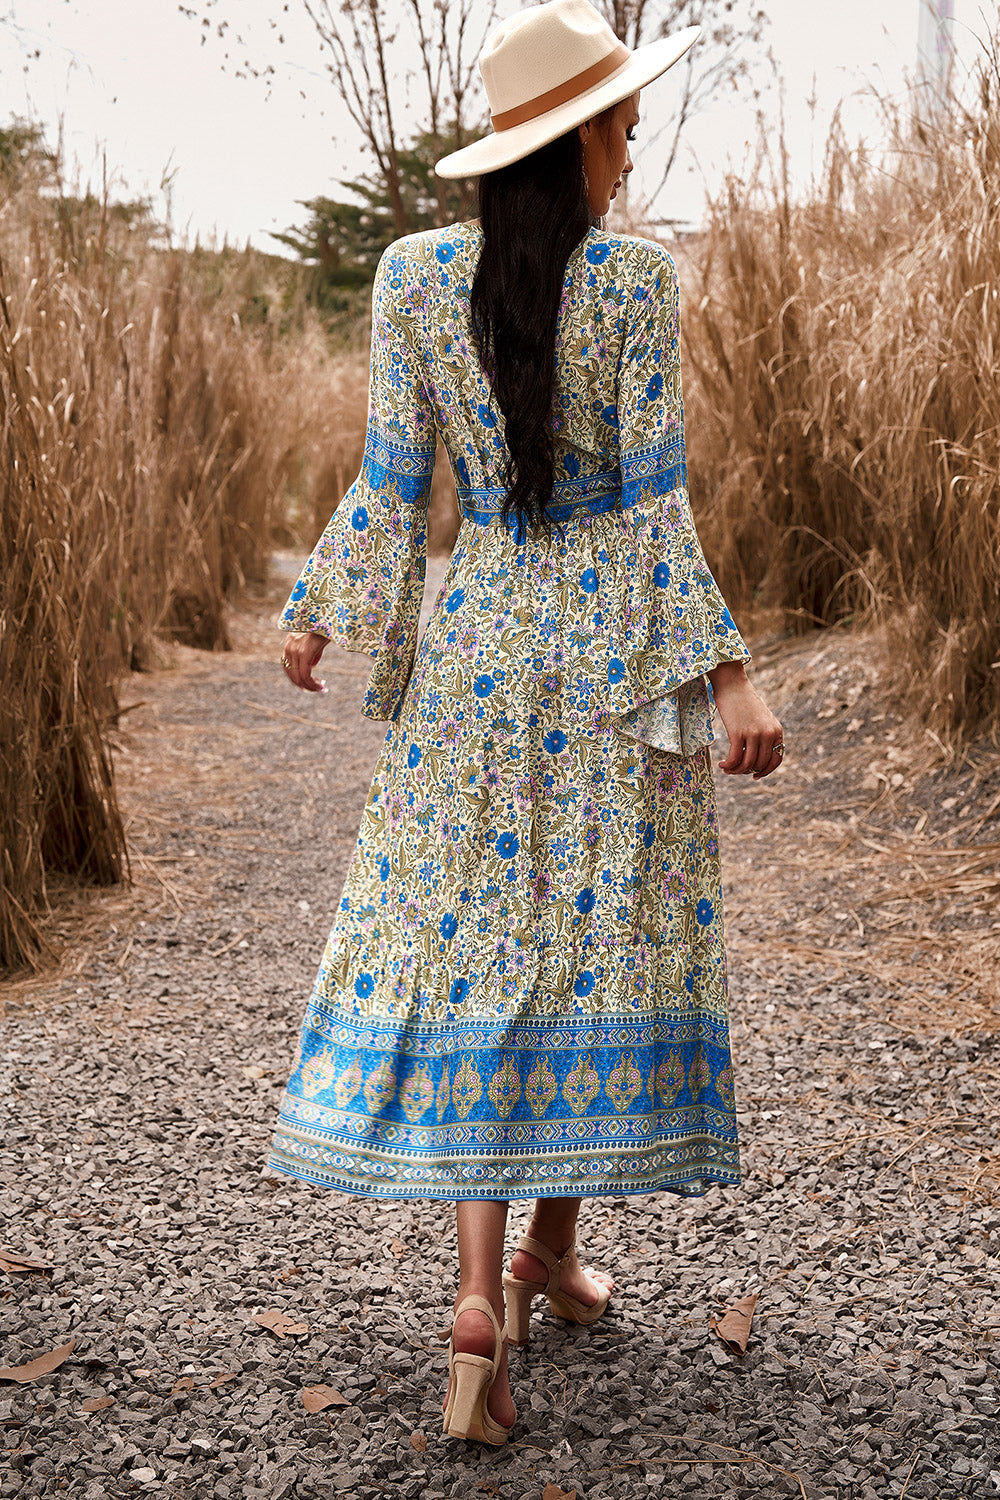 Bohemian-style Maxi Dress with floral patterns and flowy sleeves.